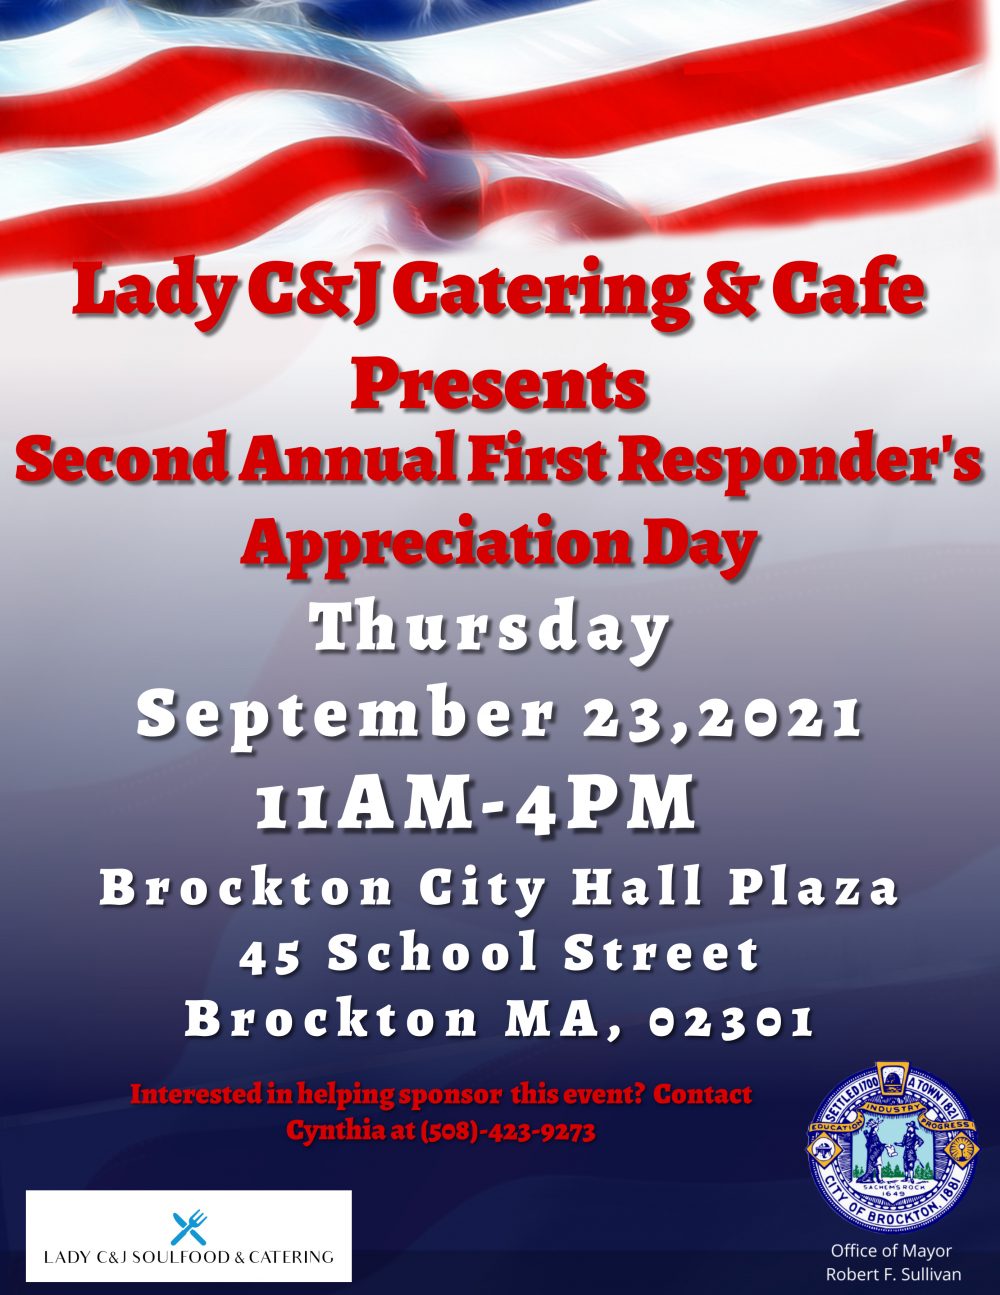 Lady C&J 2nd Annual First Responder's Appreciation Day Flyer for September 23, 2021